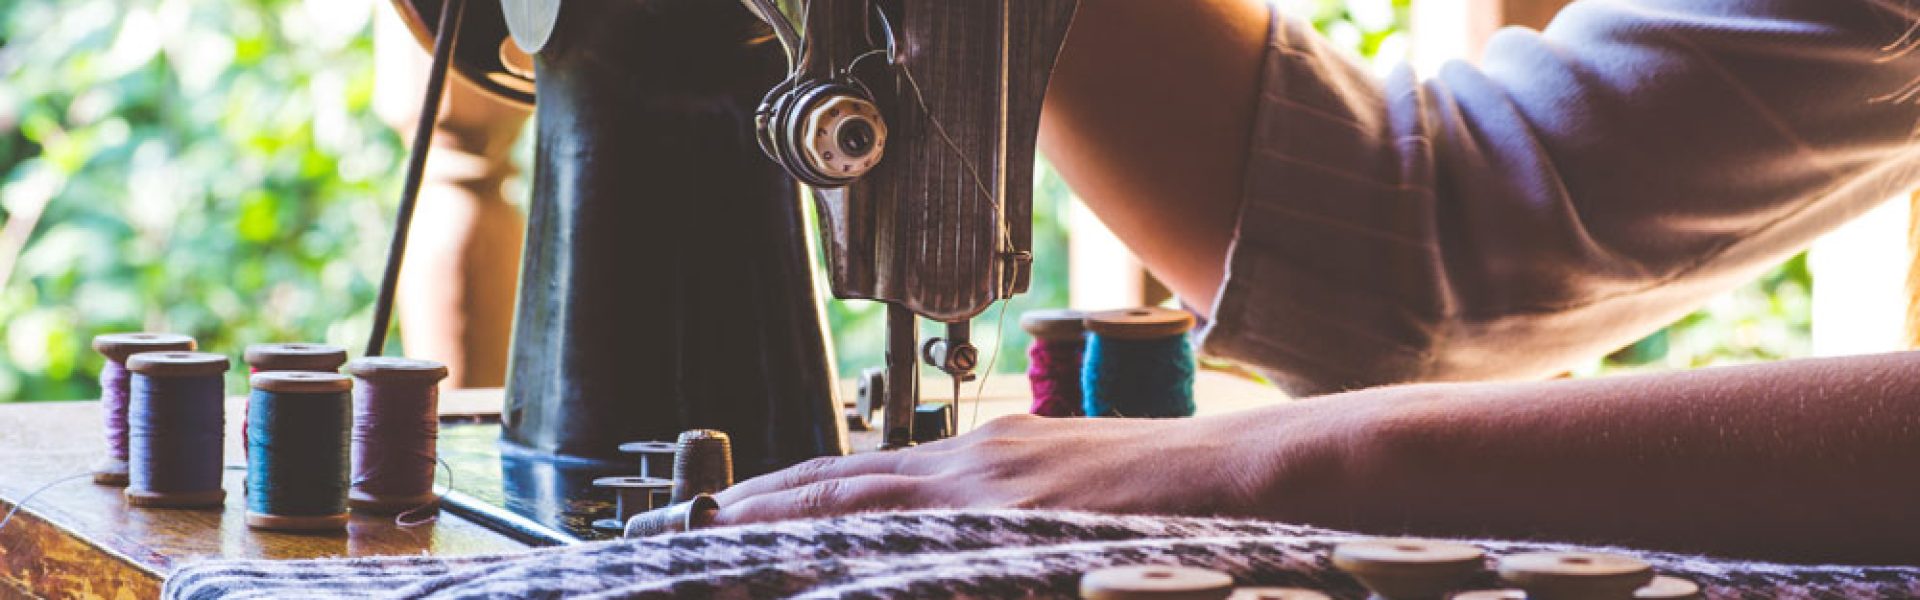 Creative Bursaries for Accredited Craft Courses by the School of Stitched Textiles